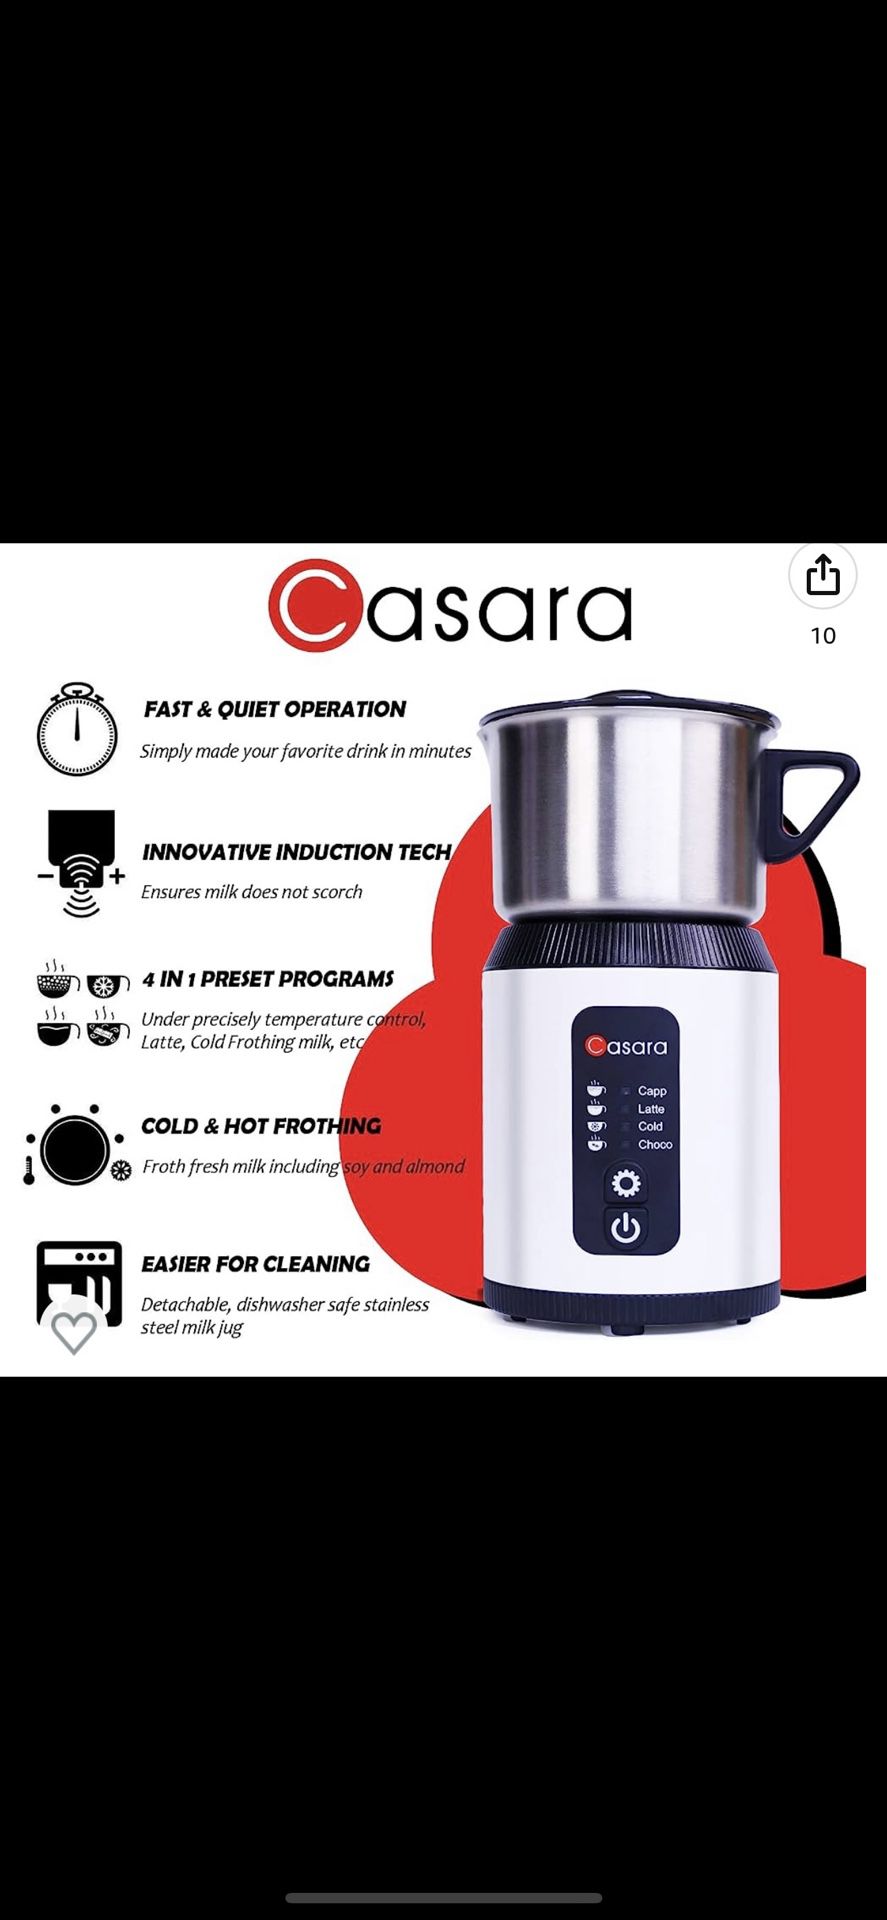 Casara Milk Frother and Steamer Machine, Warm and Cold Milk  Foamer,Professional Frothing Standard,4-in-1 Functions,Dishwasher Safe,27oz  Detachable